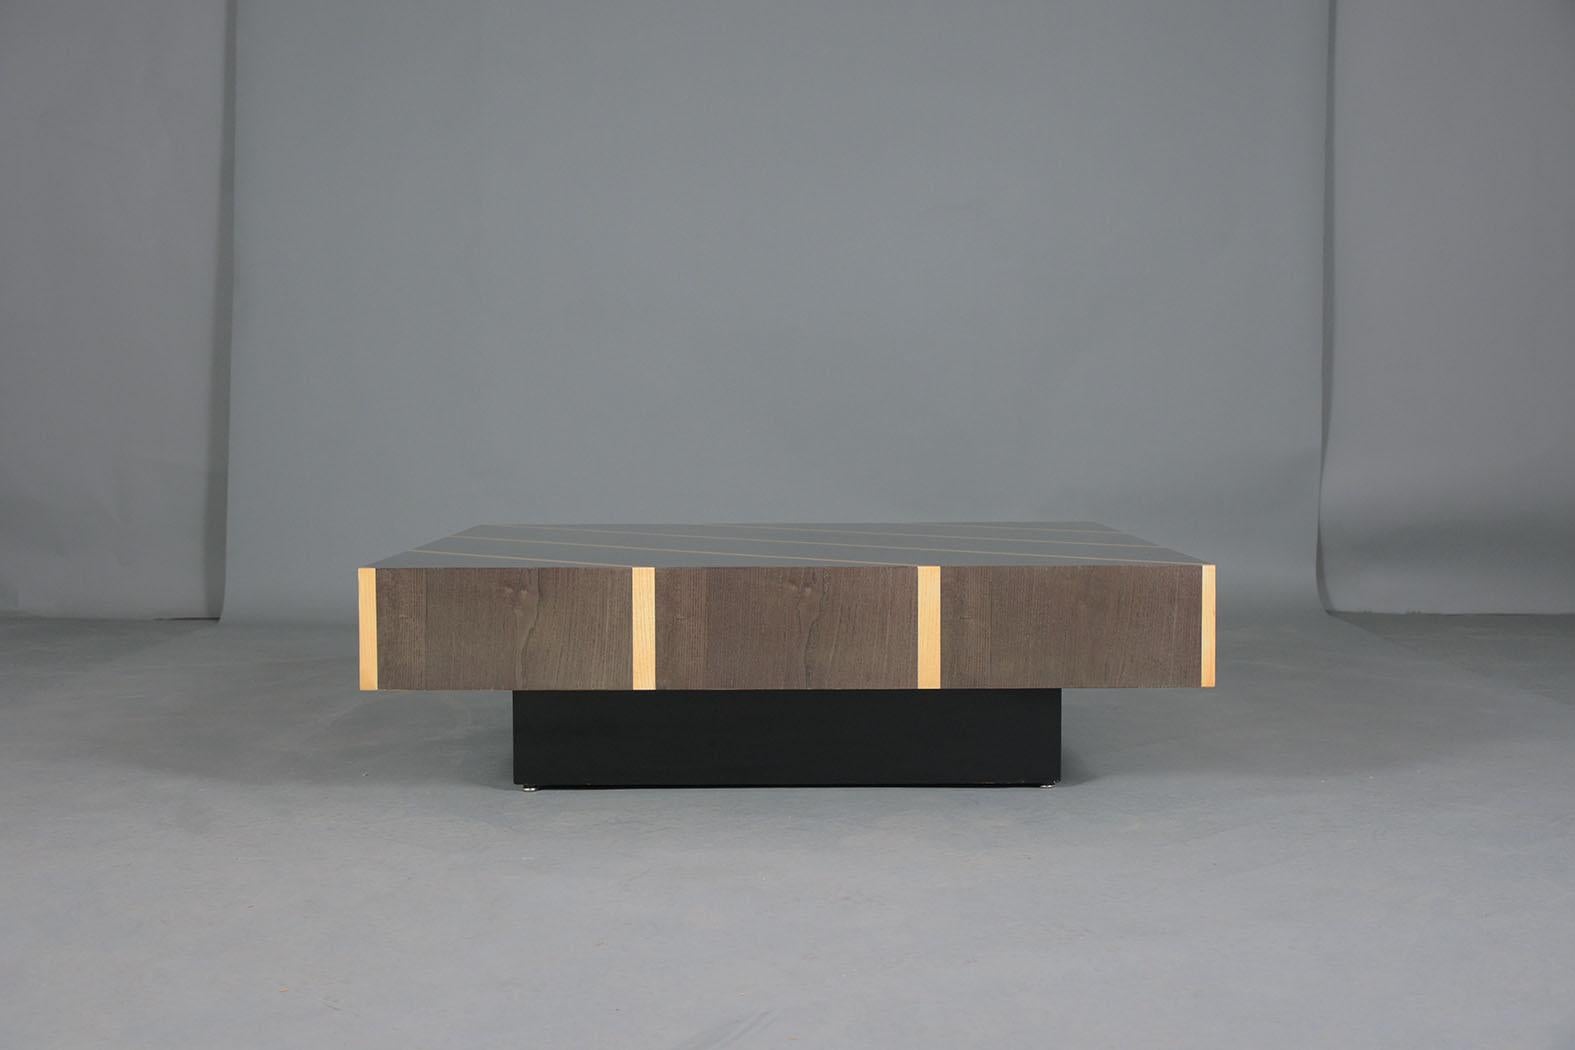 An extraordinary 1960s modern coffee table - Hand crafted wood, professionally restored by our craftsmen. This sleek cocktail table features eye-catching veneers and a beautiful lacquer finish. This table sits on a floating platform finished in an